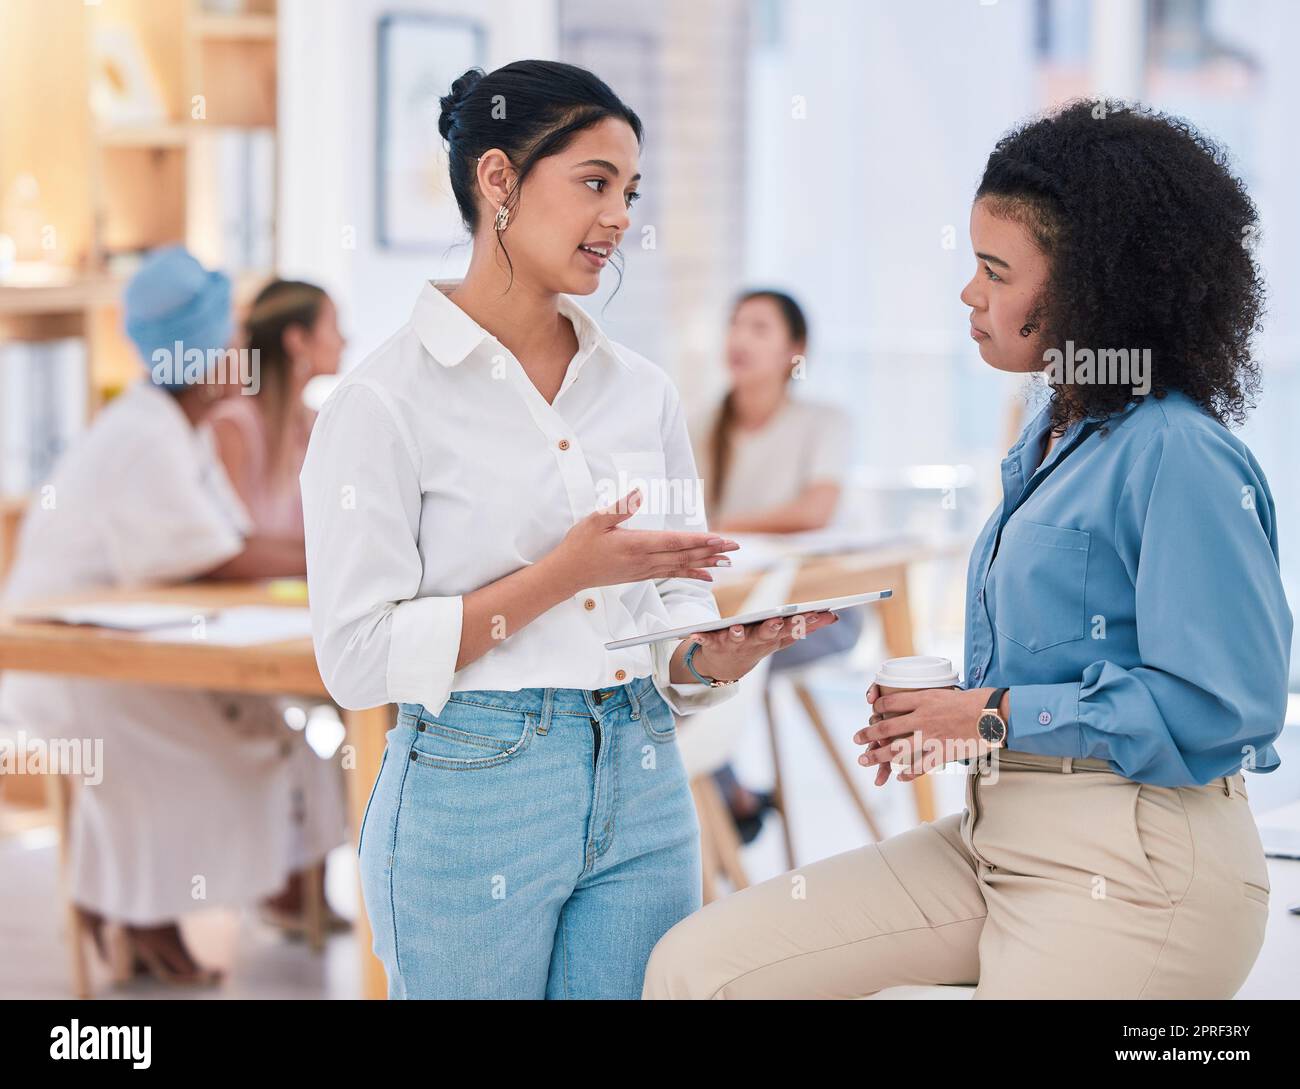 Empowered businesswomen working together on a project in the office. Female employees at work talking, collaborating, and brainstorming. Marketing agency with busy business people browsing technology Stock Photo